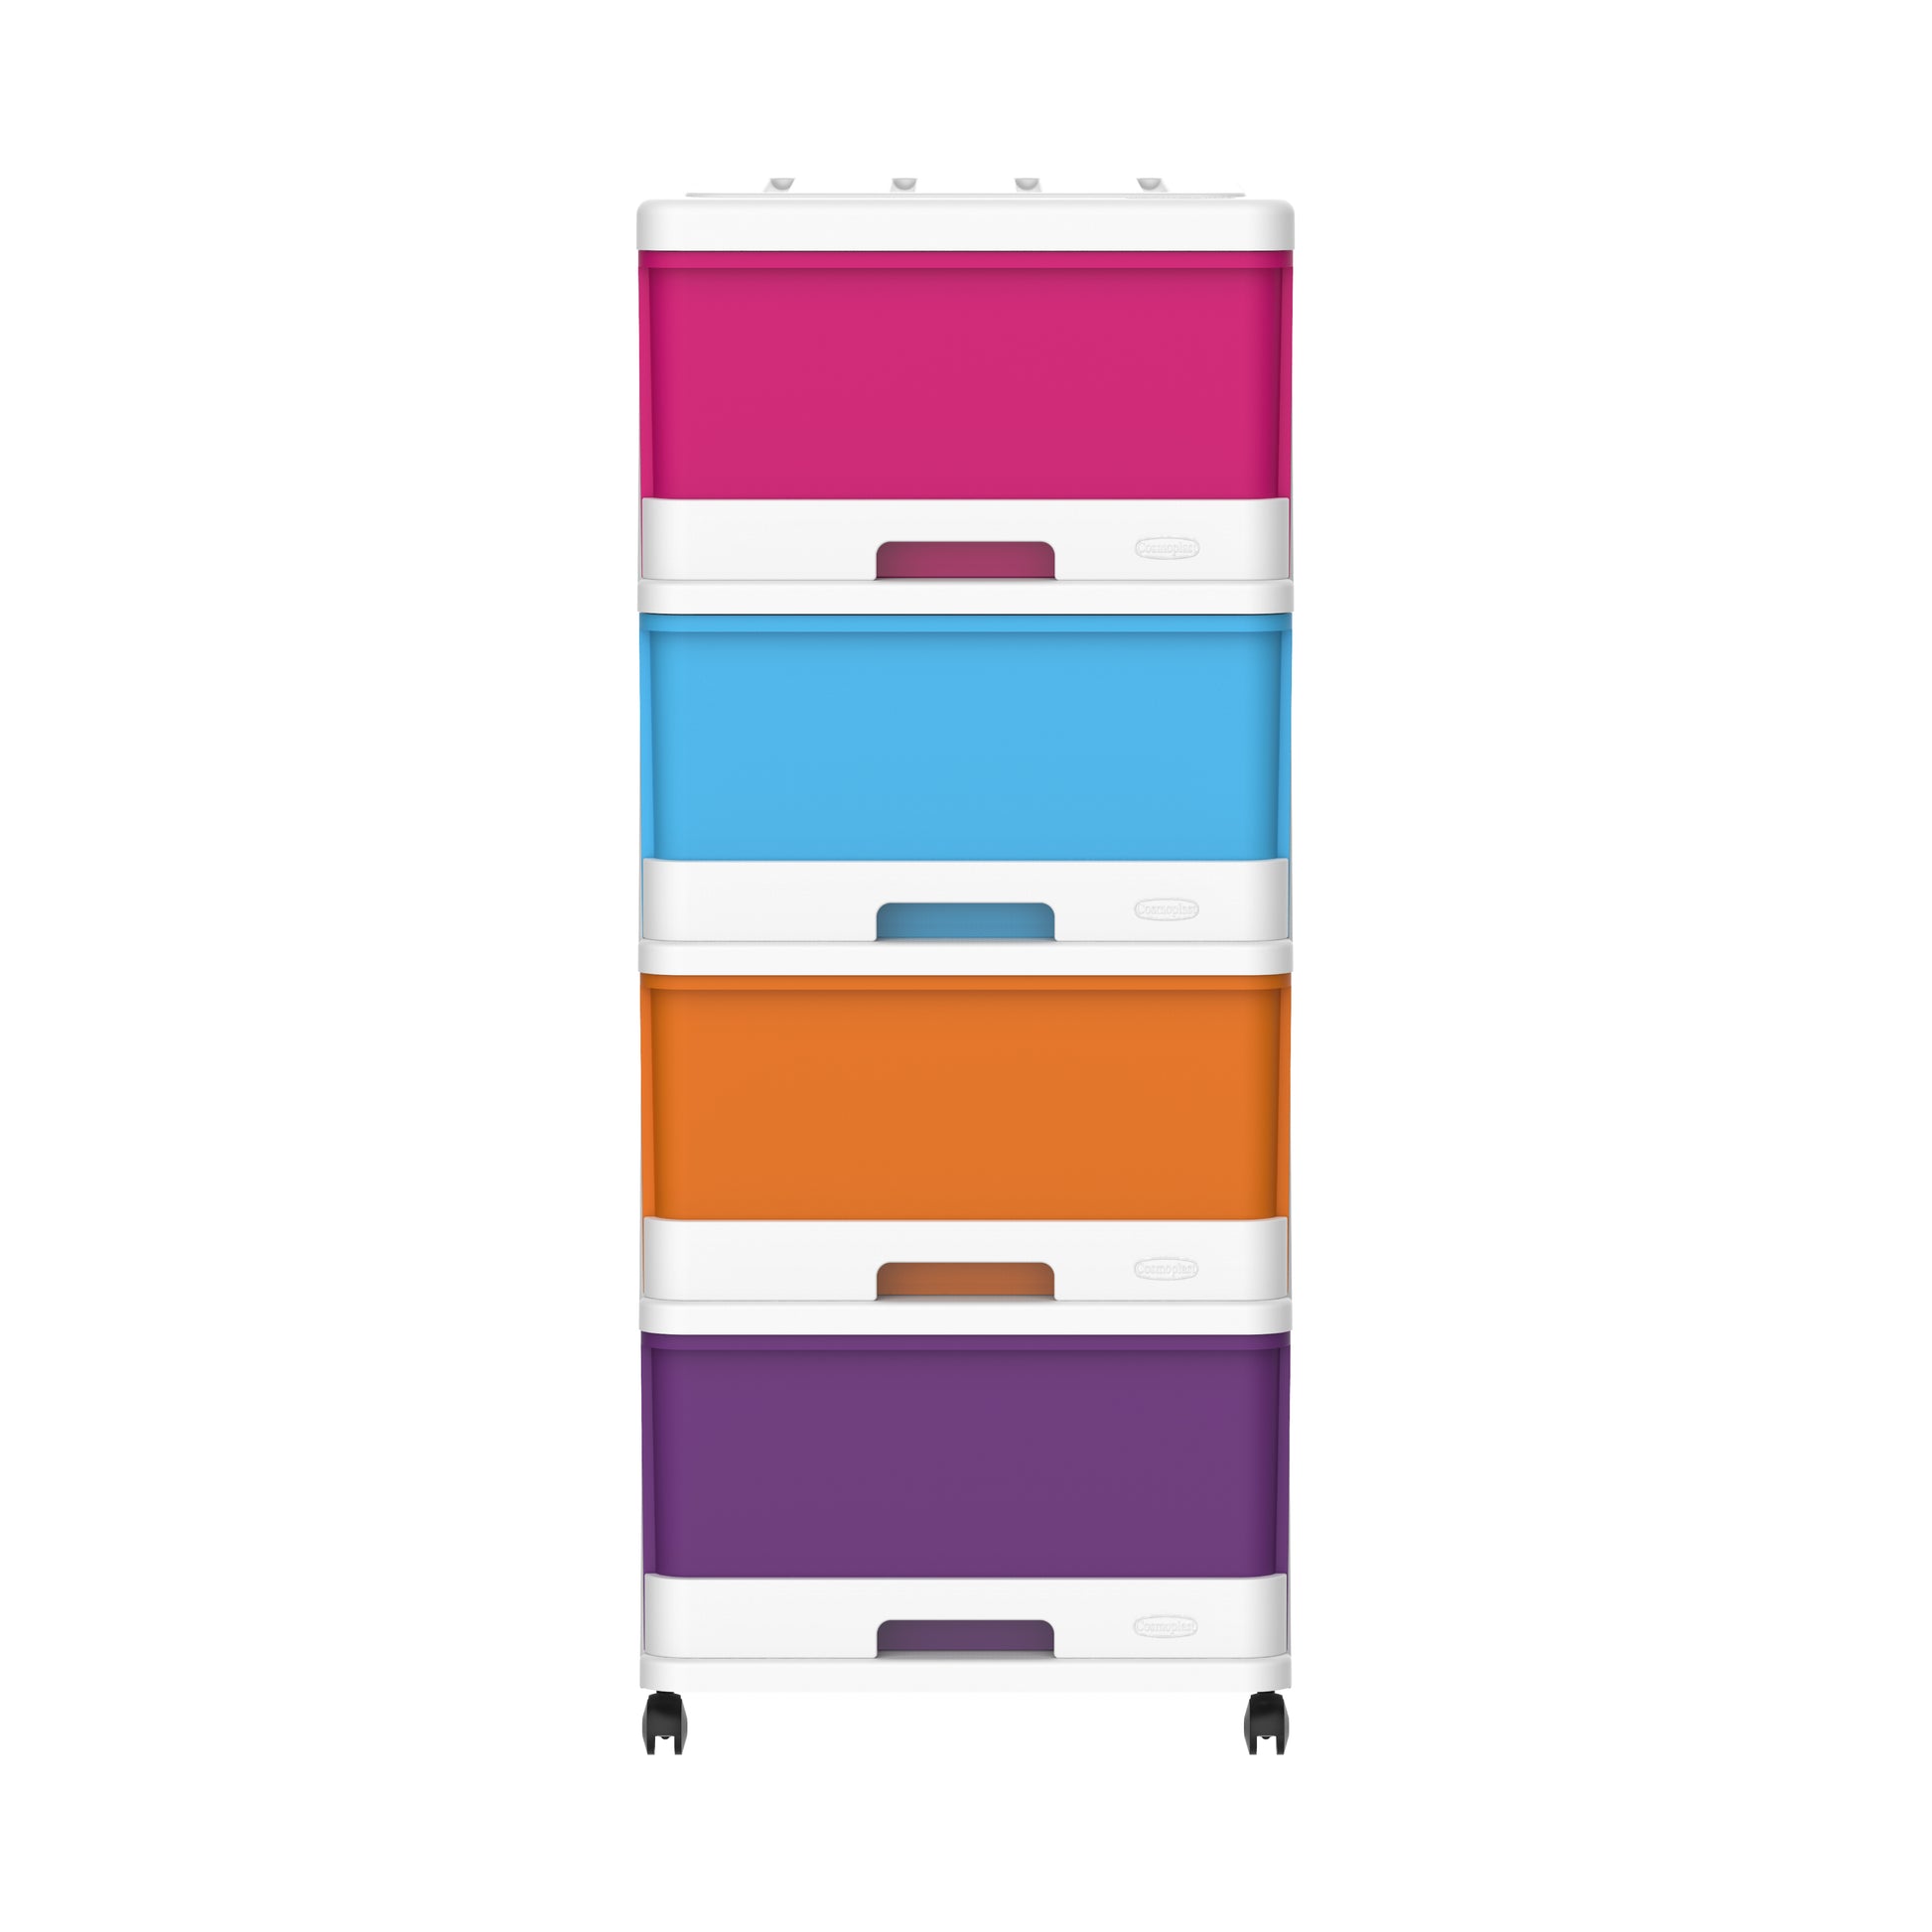 4 Tiers Storage Cabinet with Drawers & Wheels